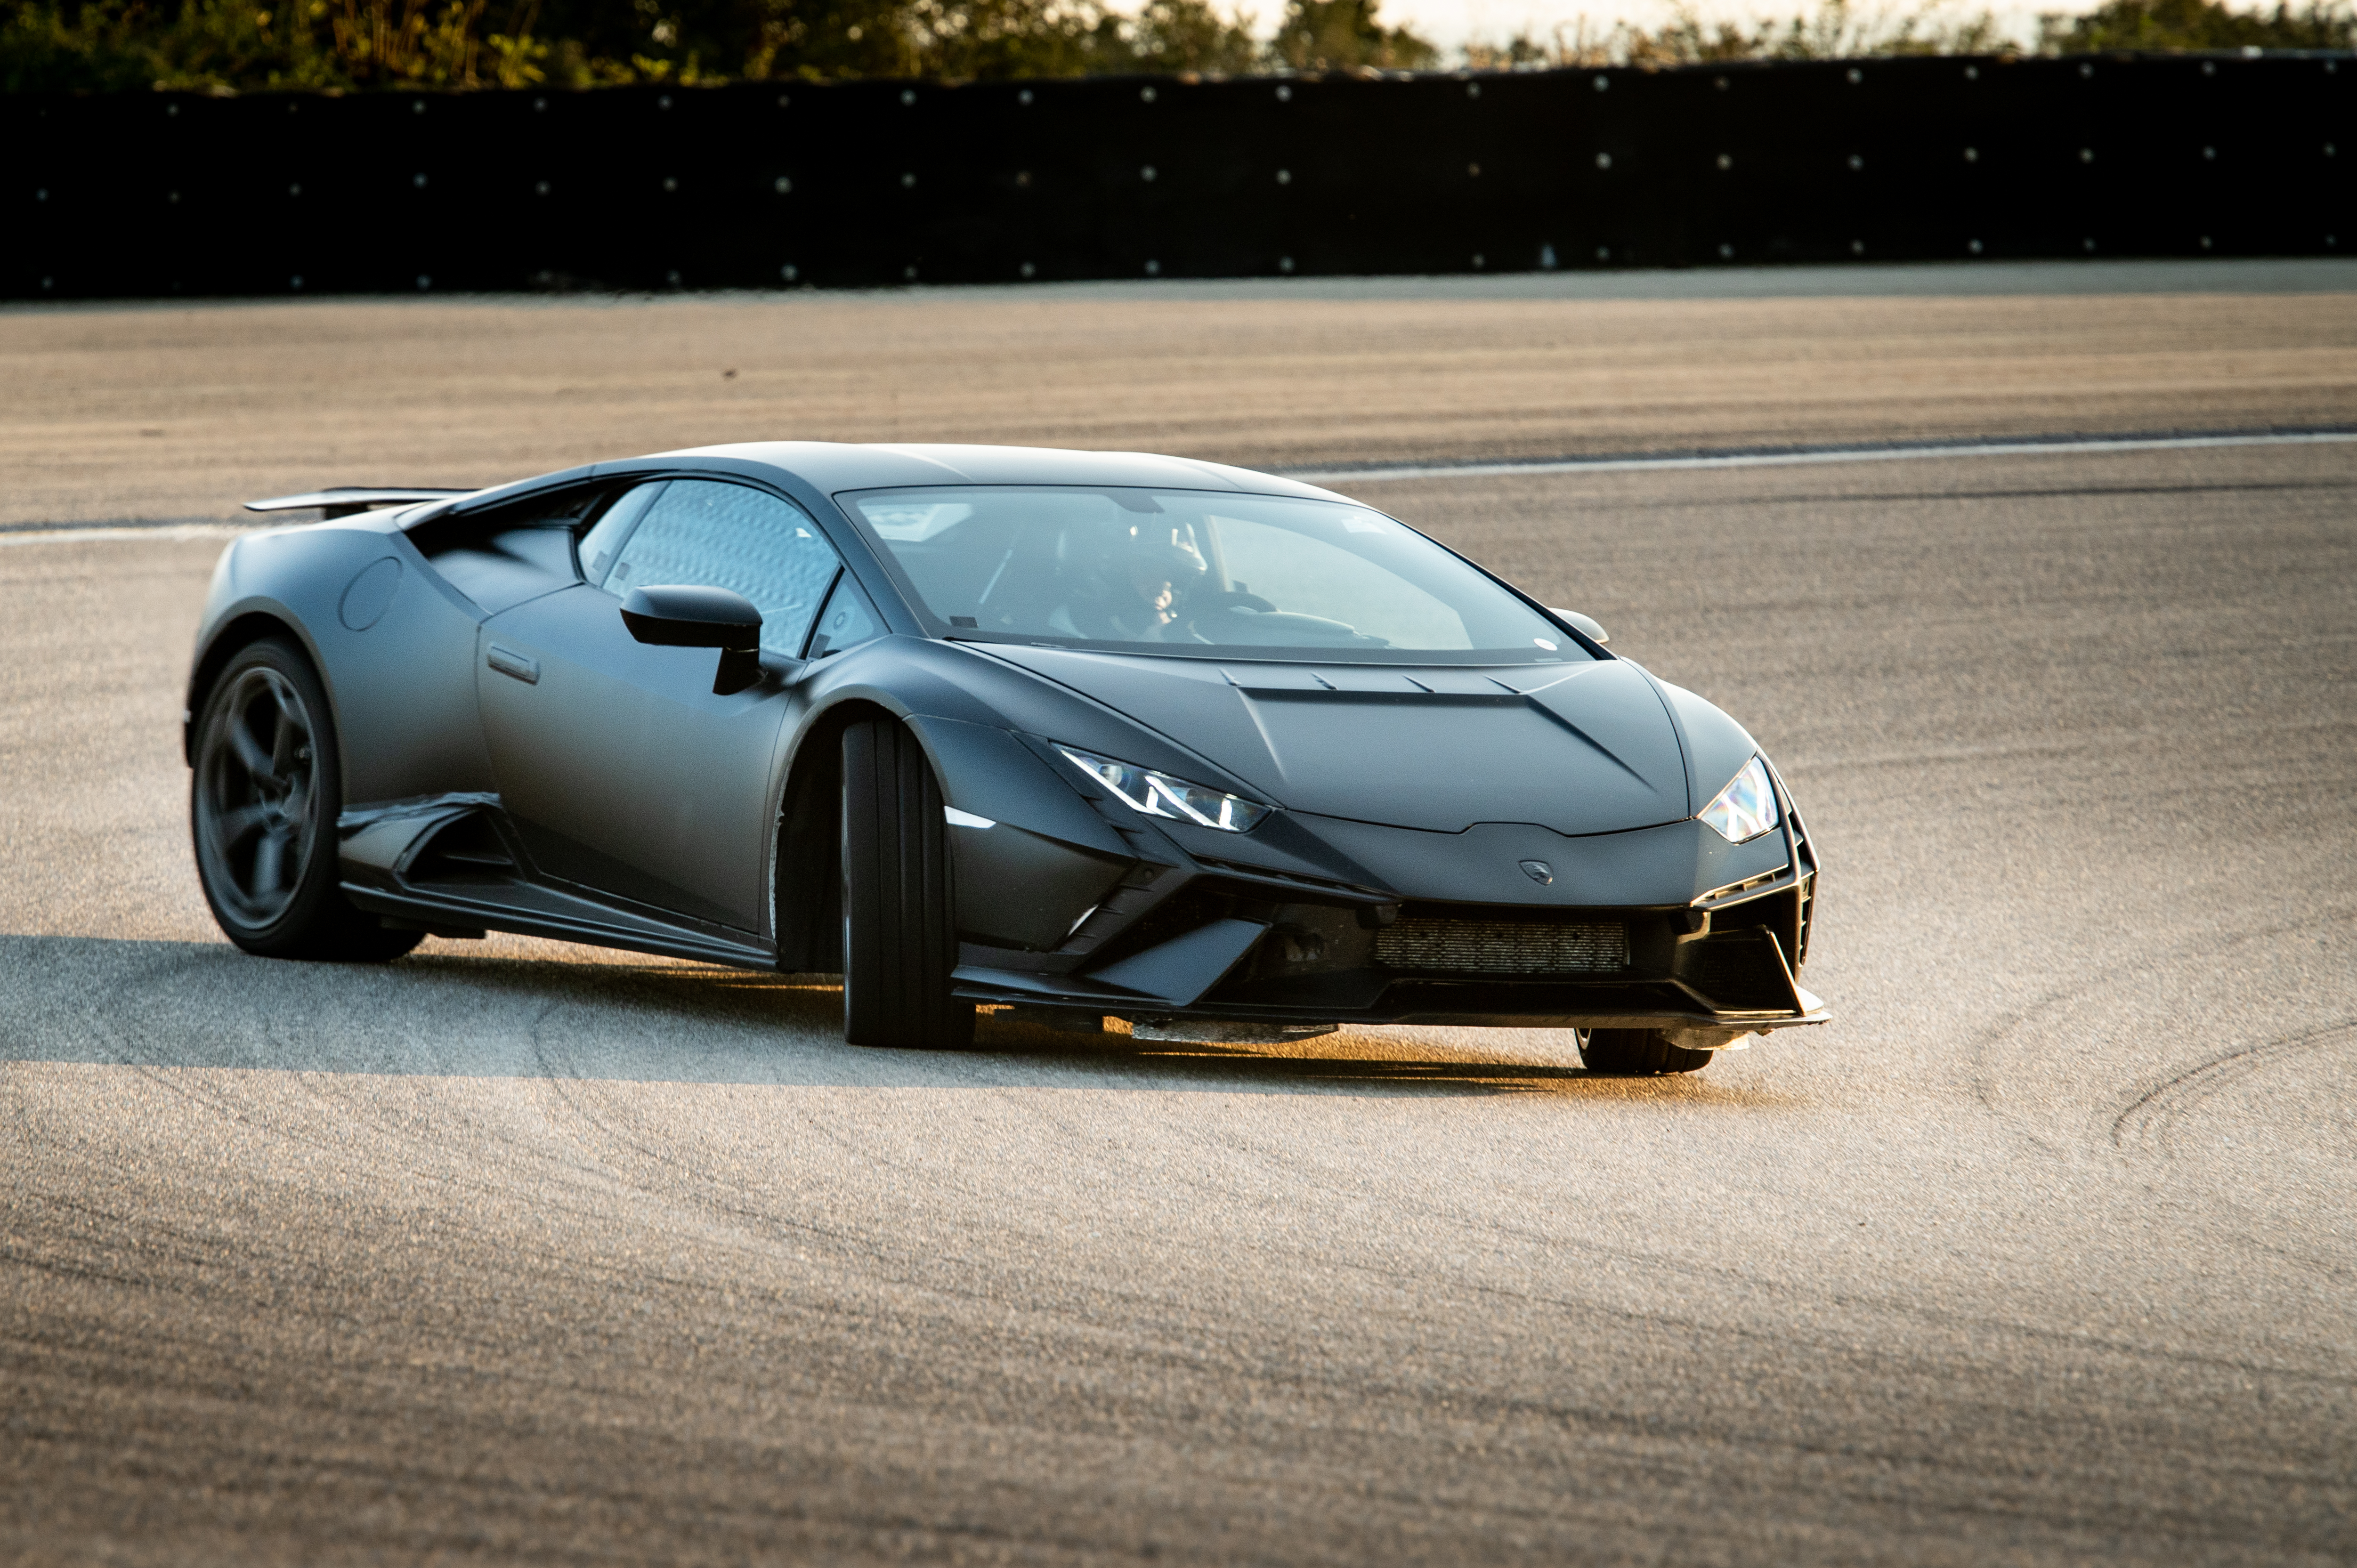 Lamborghini Huracan Tecnica review: not as scary as you'd think